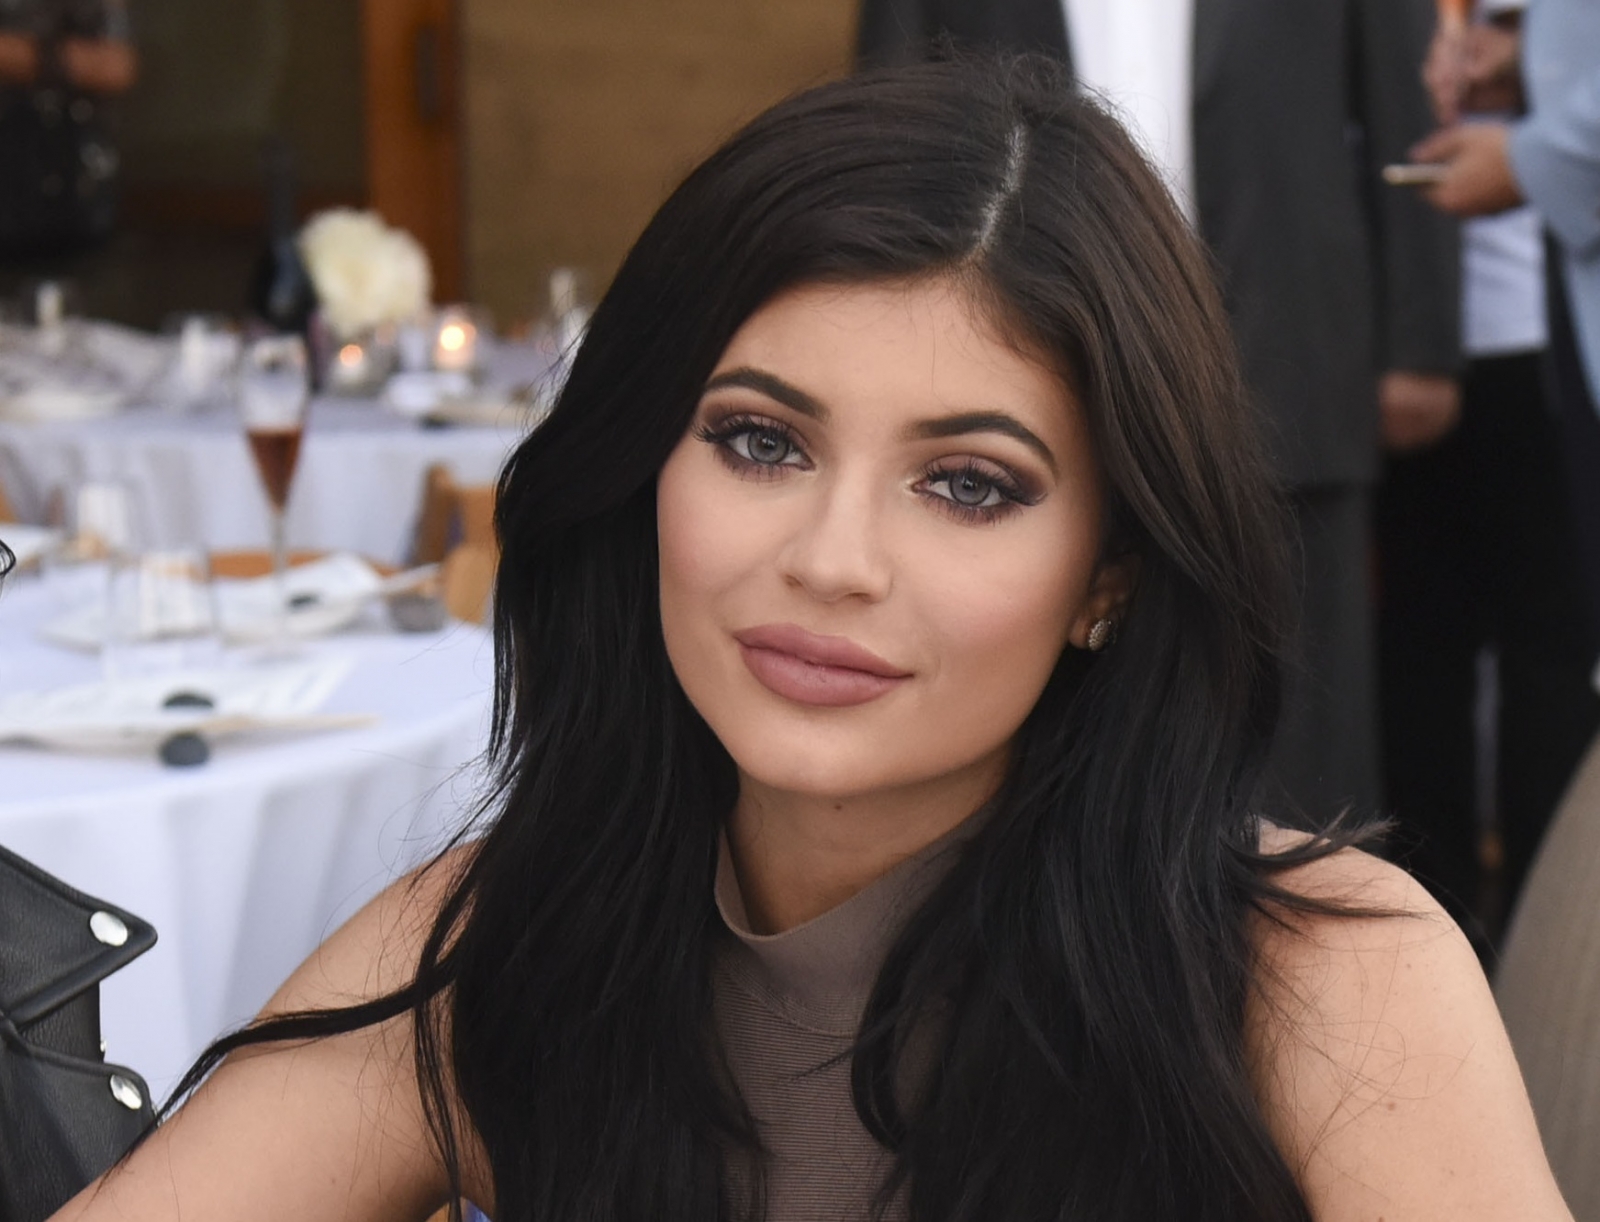 Kylie Jenner's skincare line 'Kylie Skin' is launching in the UK next week